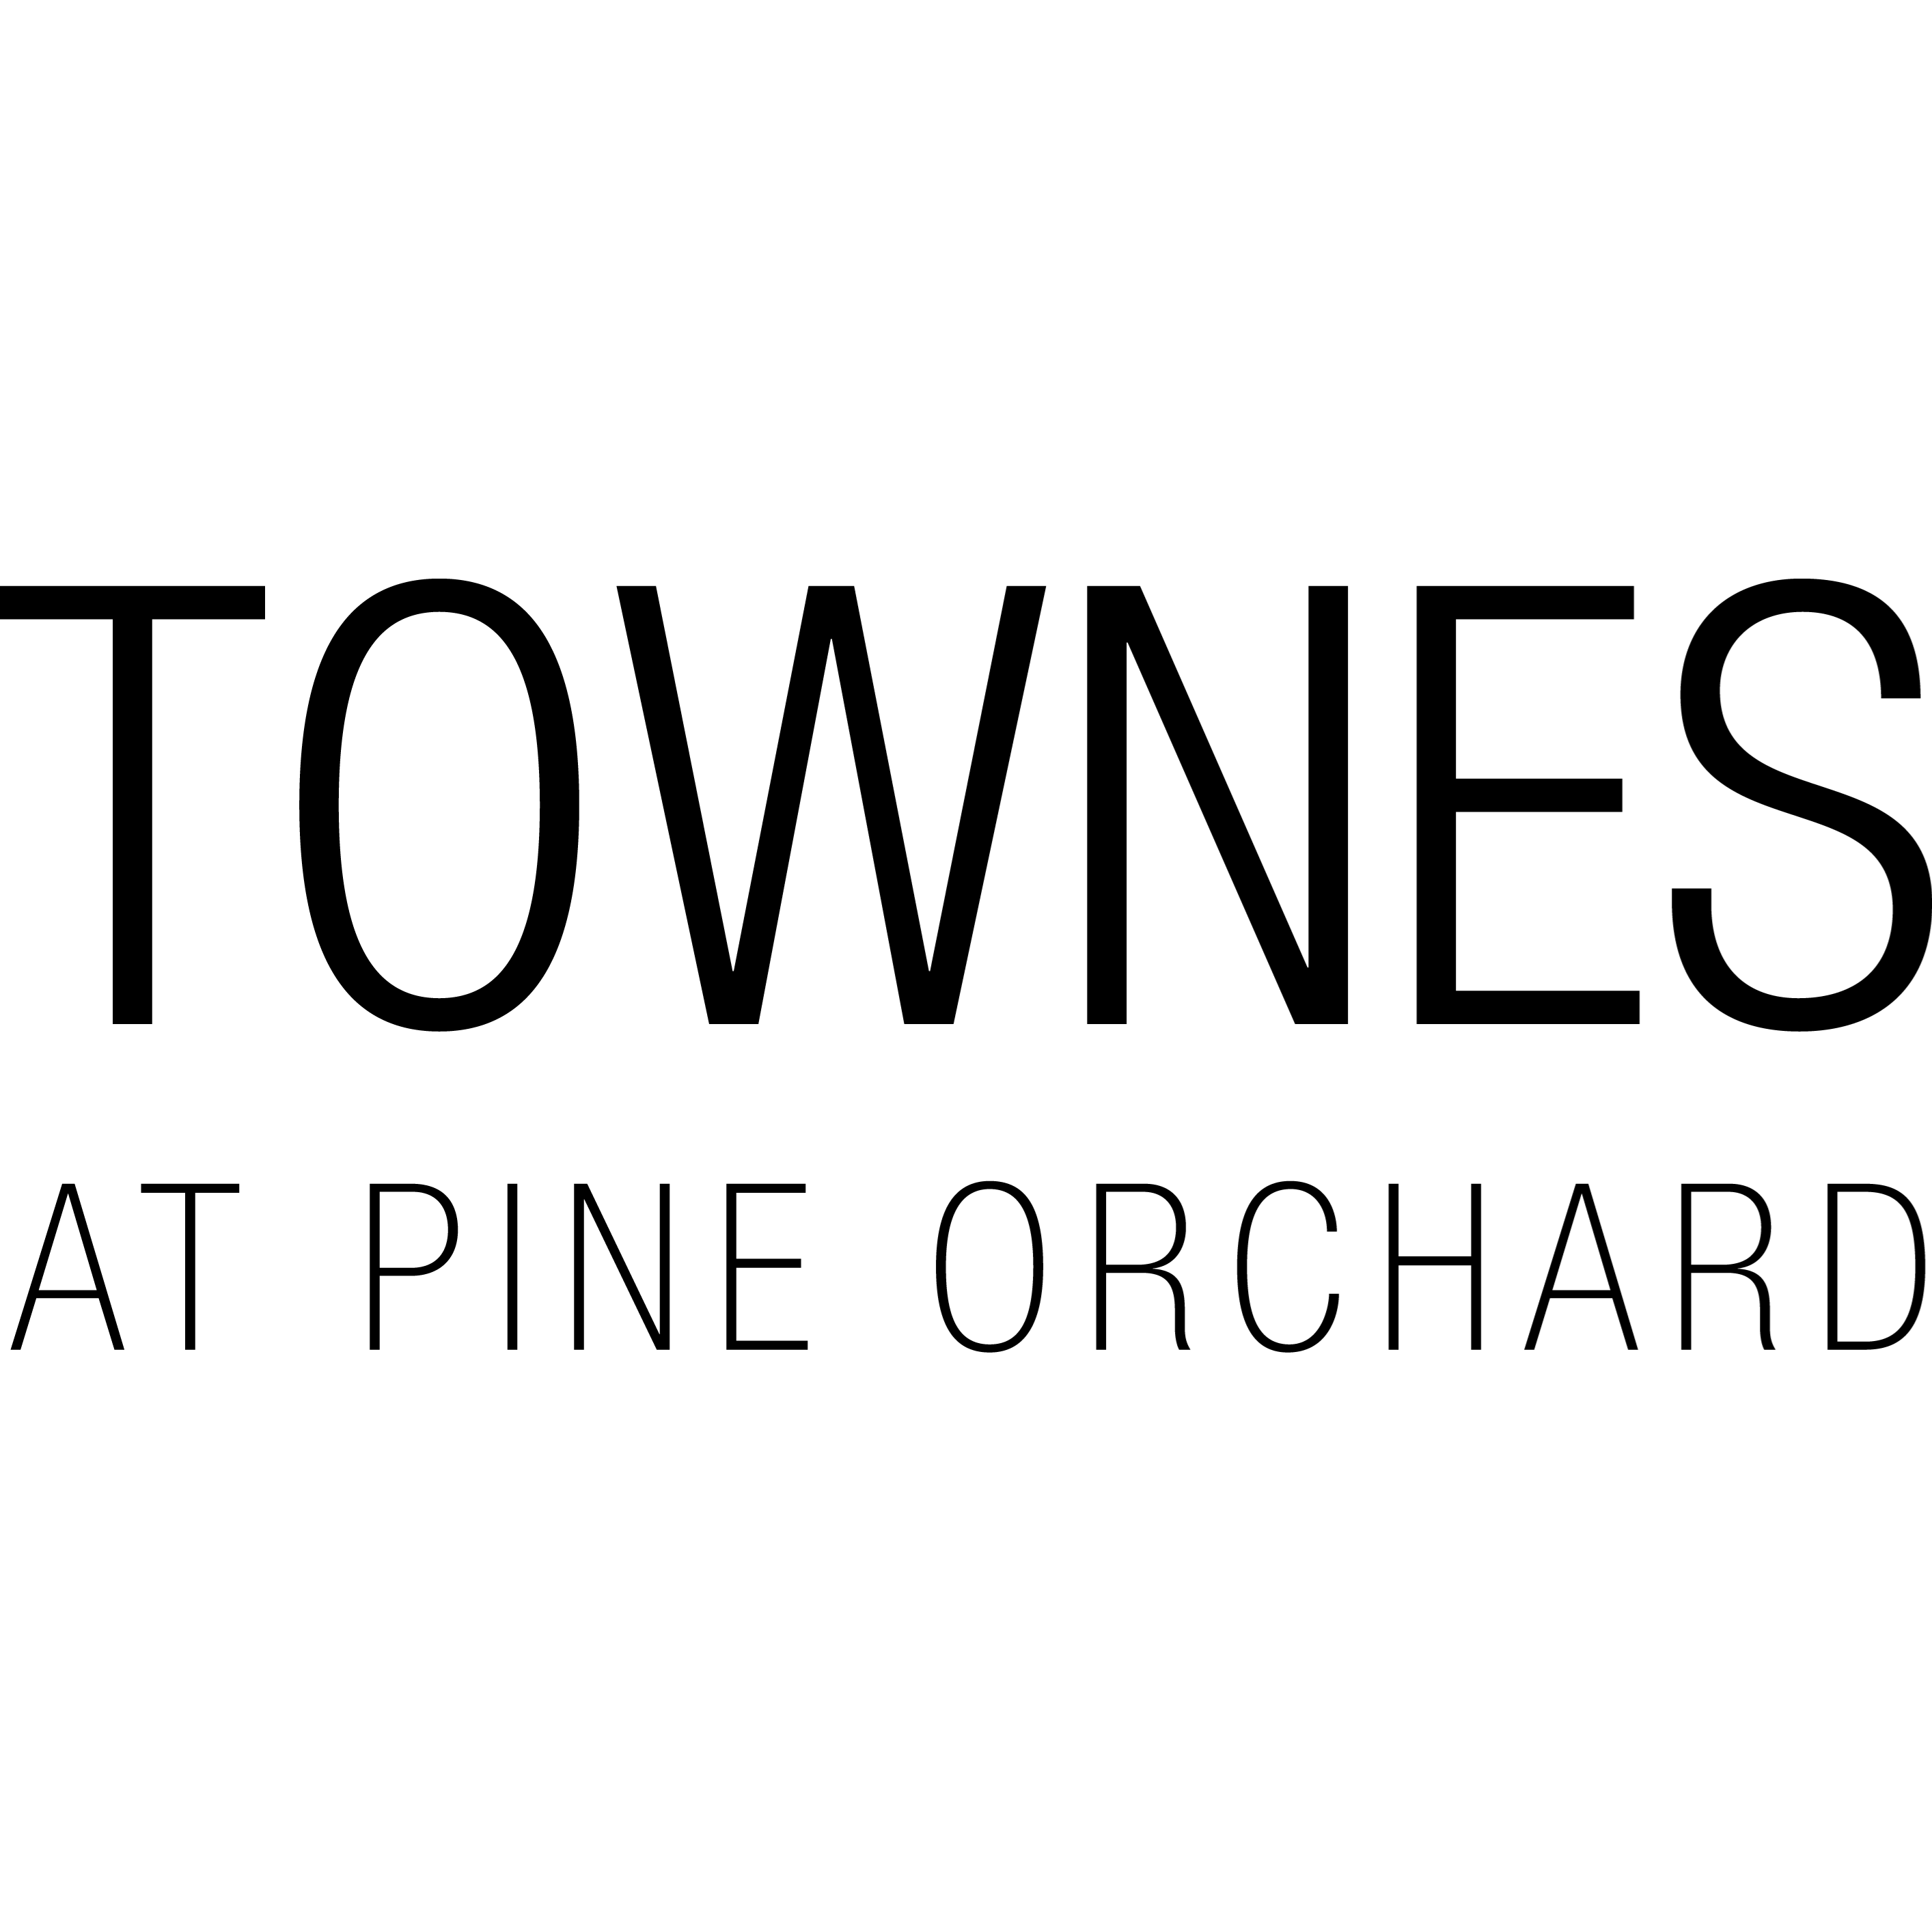 Townes at Pine Orchard - Ellicott City, MD 21042 - (844)484-3557 | ShowMeLocal.com